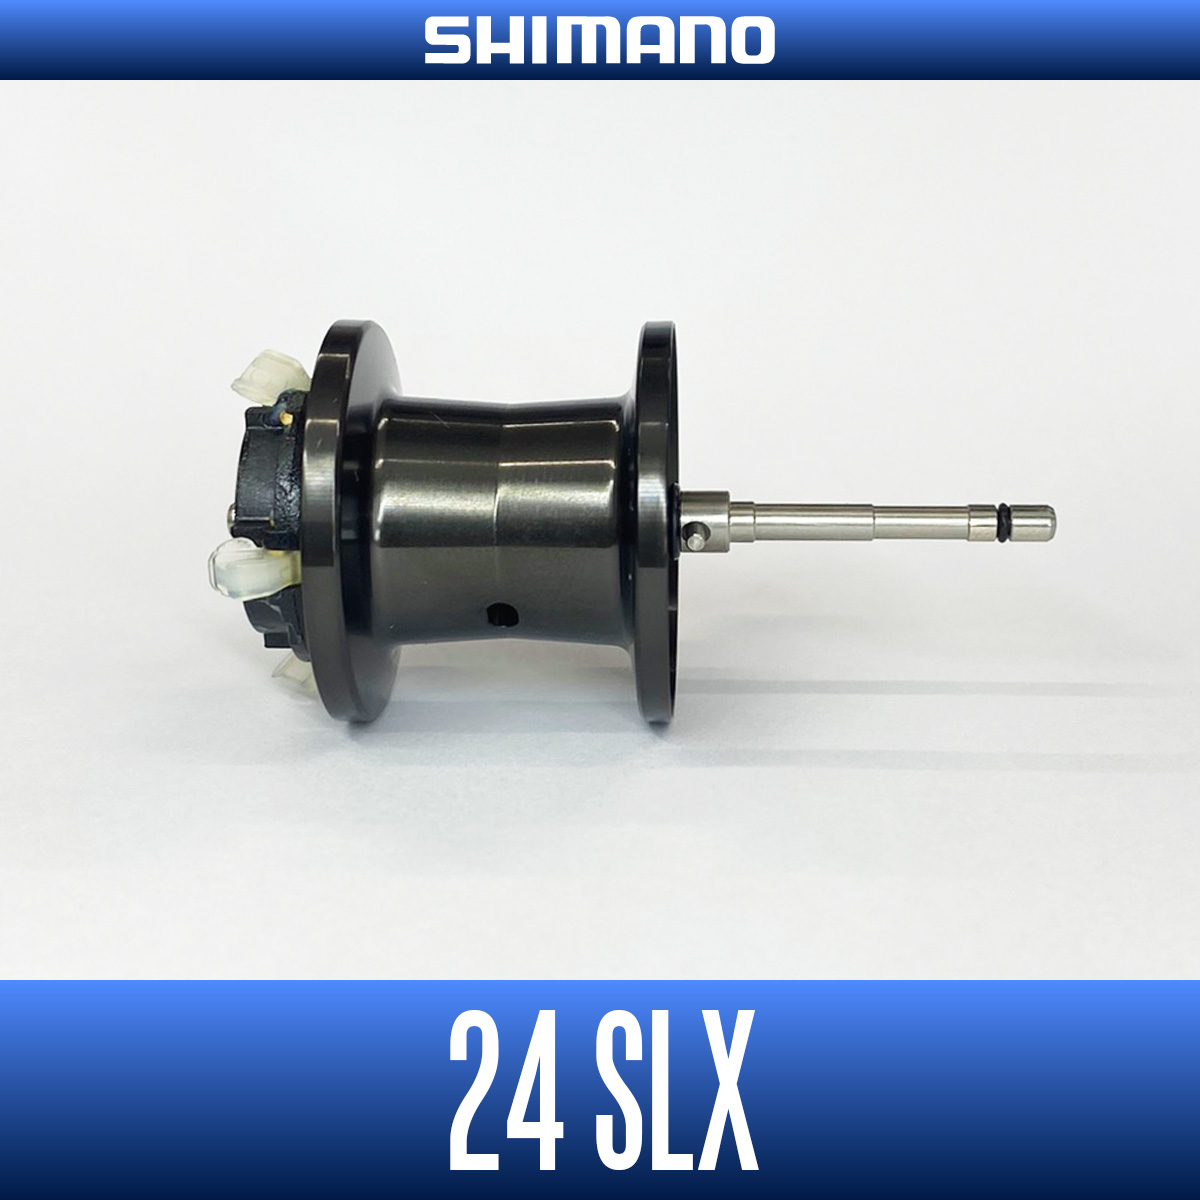 [SHIMANO] 24 SLX Spare Spool Product code: 046956/No.82/S Part No. 13ZYE/SPOOL ASSEMBLY **Back-order (Shipping in 3-4 weeks after receiving order)